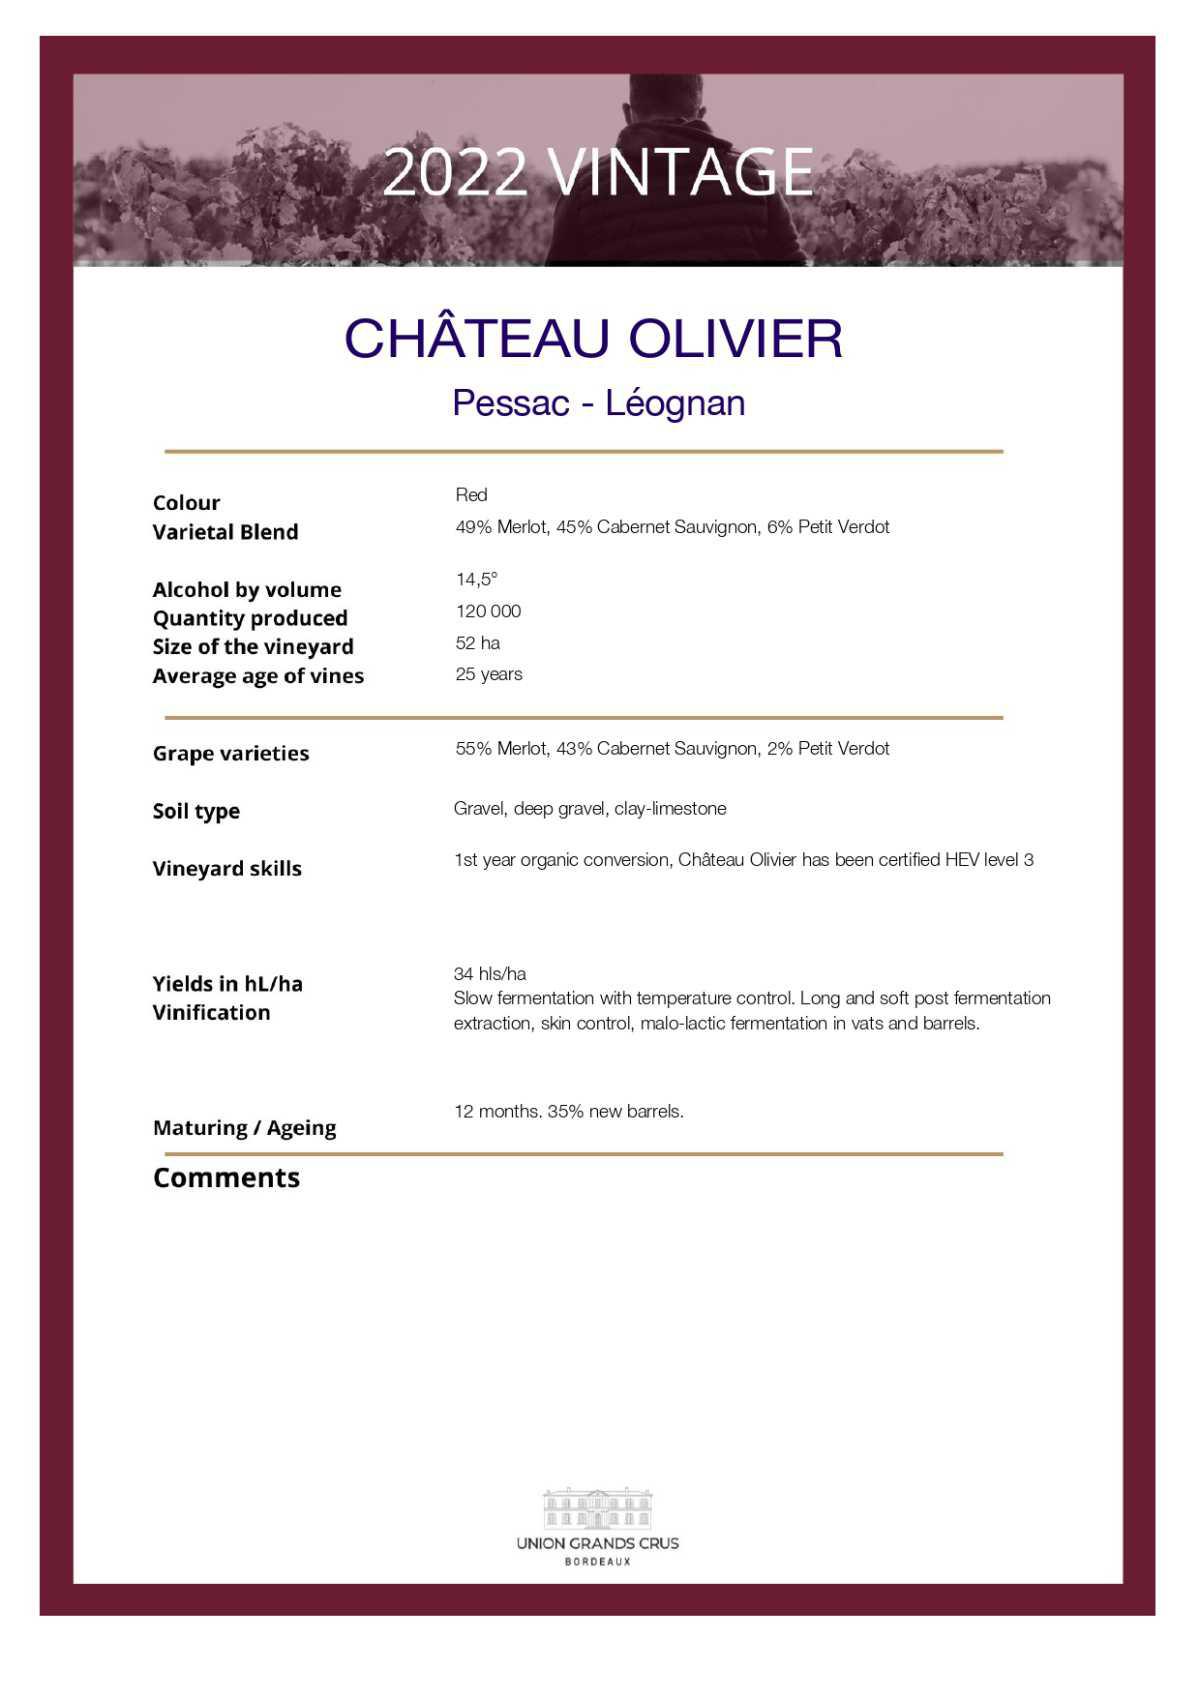  Château Olivier - Red